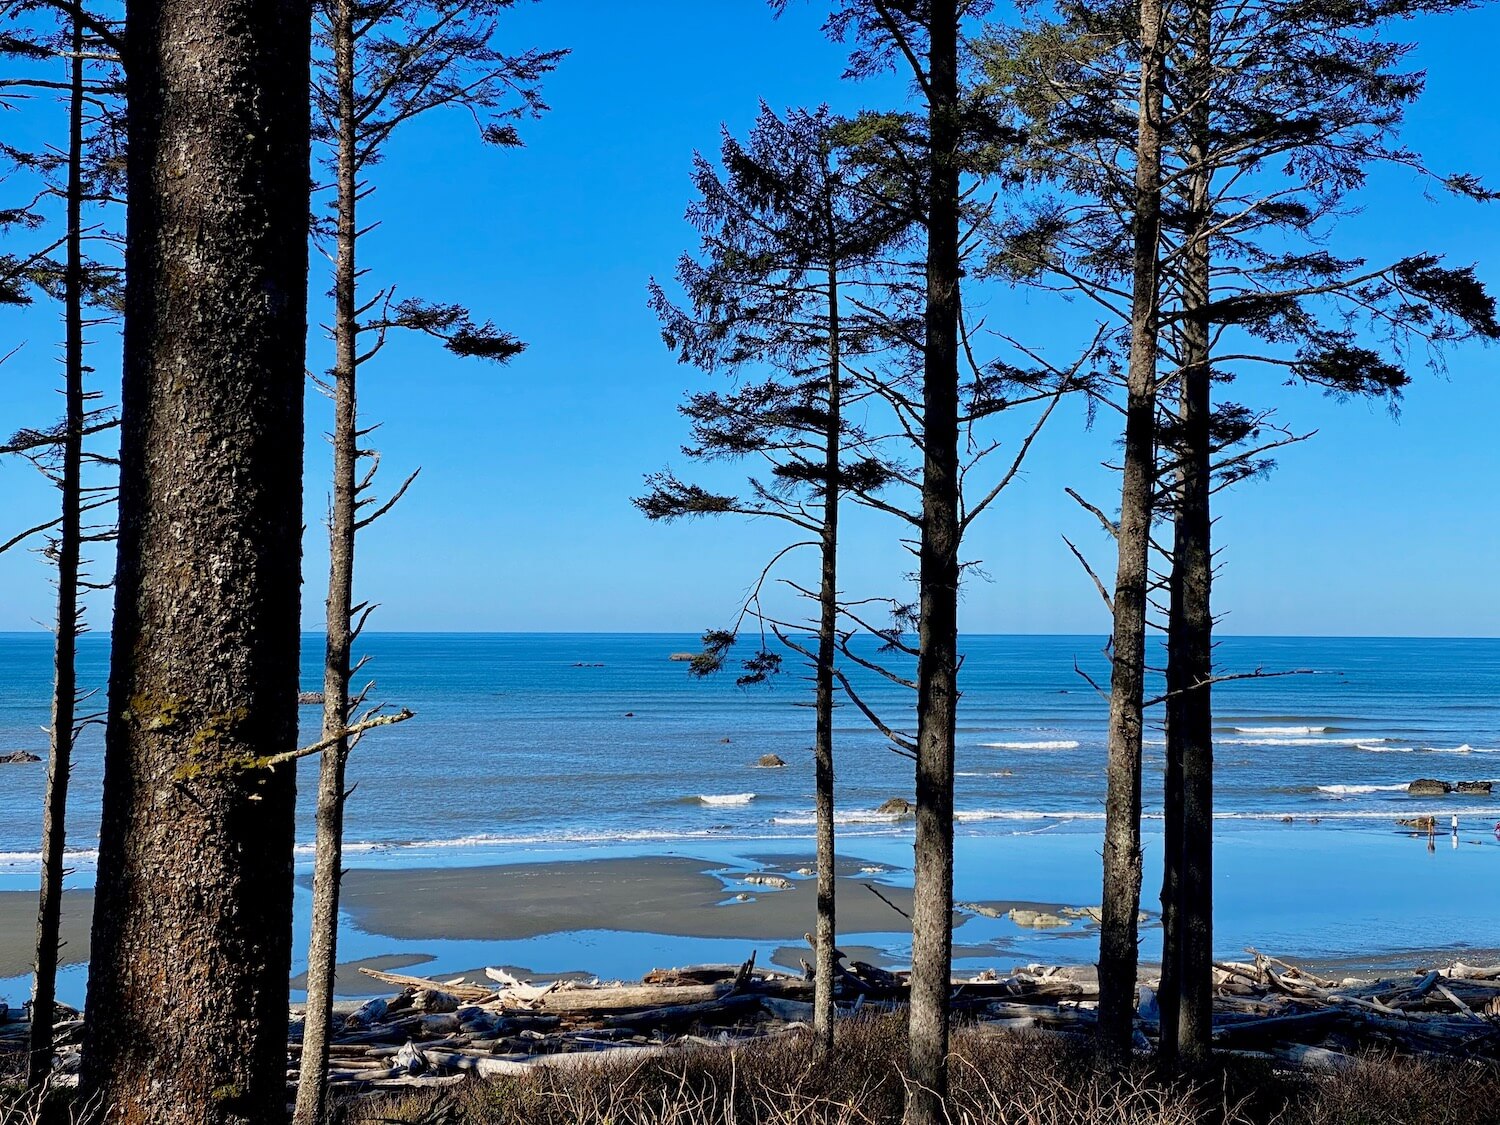 The waves lightly roll onto a low tide sand of Ruby Beach on the Washignton Coast. Pine and fir trees lead down a hill to drift logs piled up on the sand. The water is blue with white caps and the sky is blue on the horizon of the Pacific Ocean.